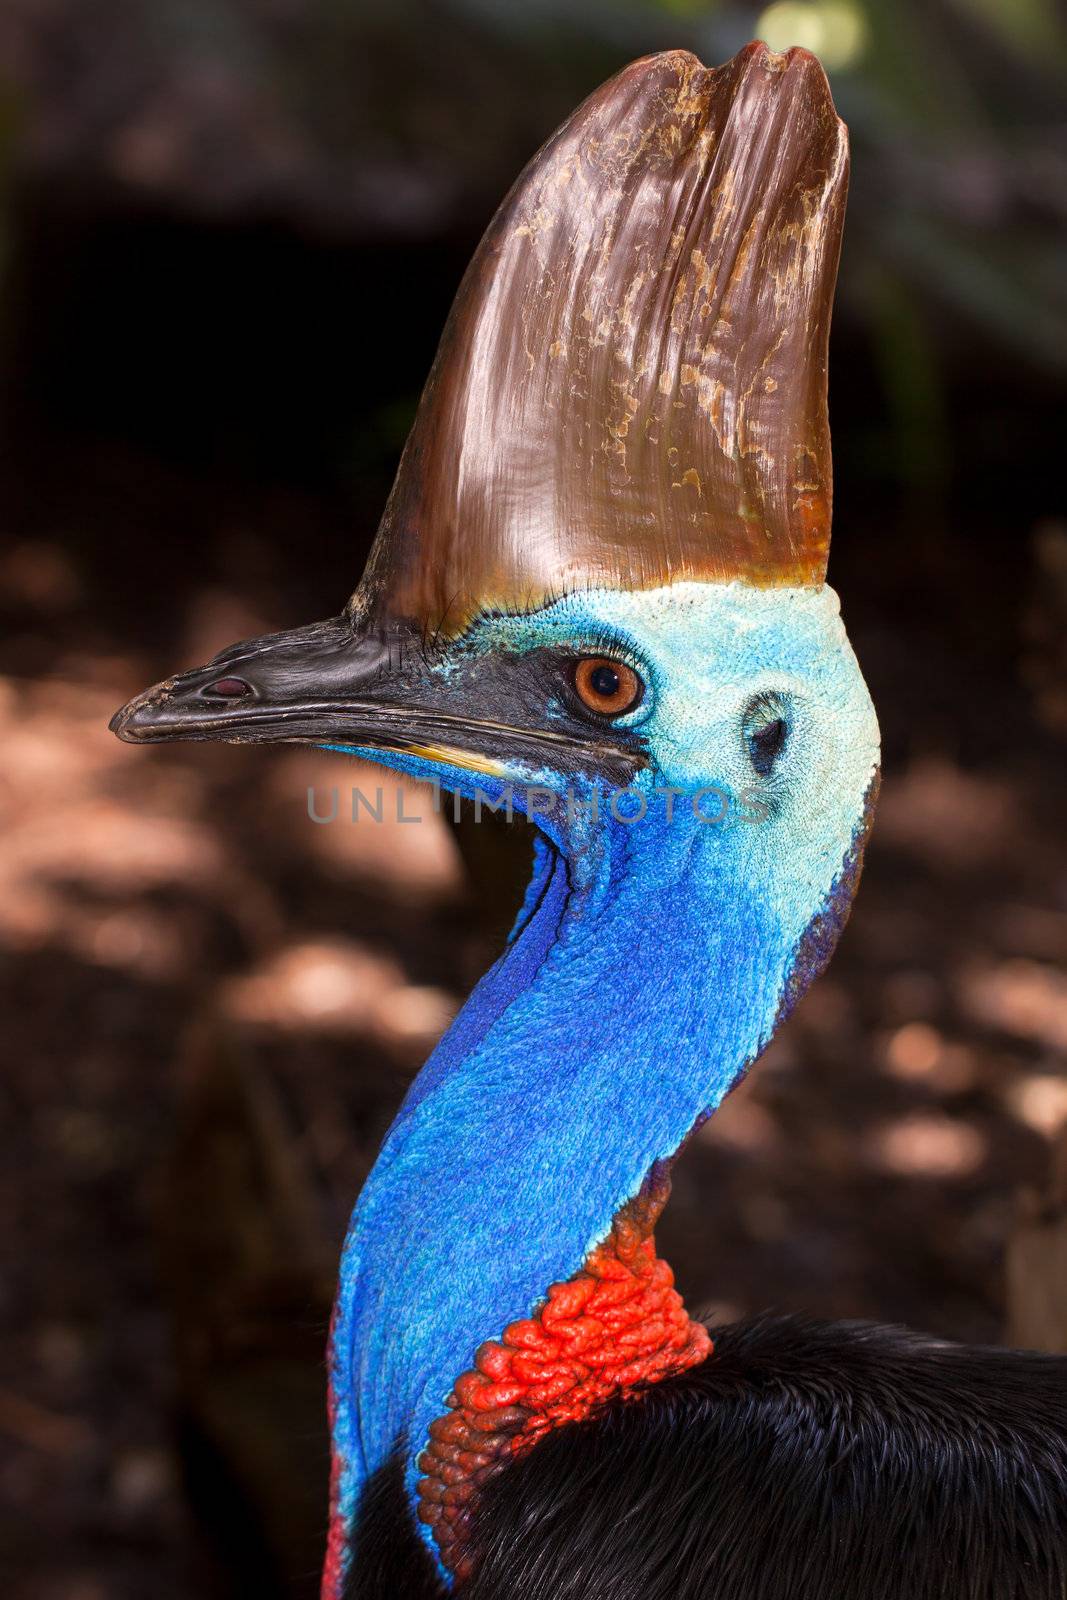 A profile portrait of the massive flighless bird, the Cassowary, in Queensland, Australia